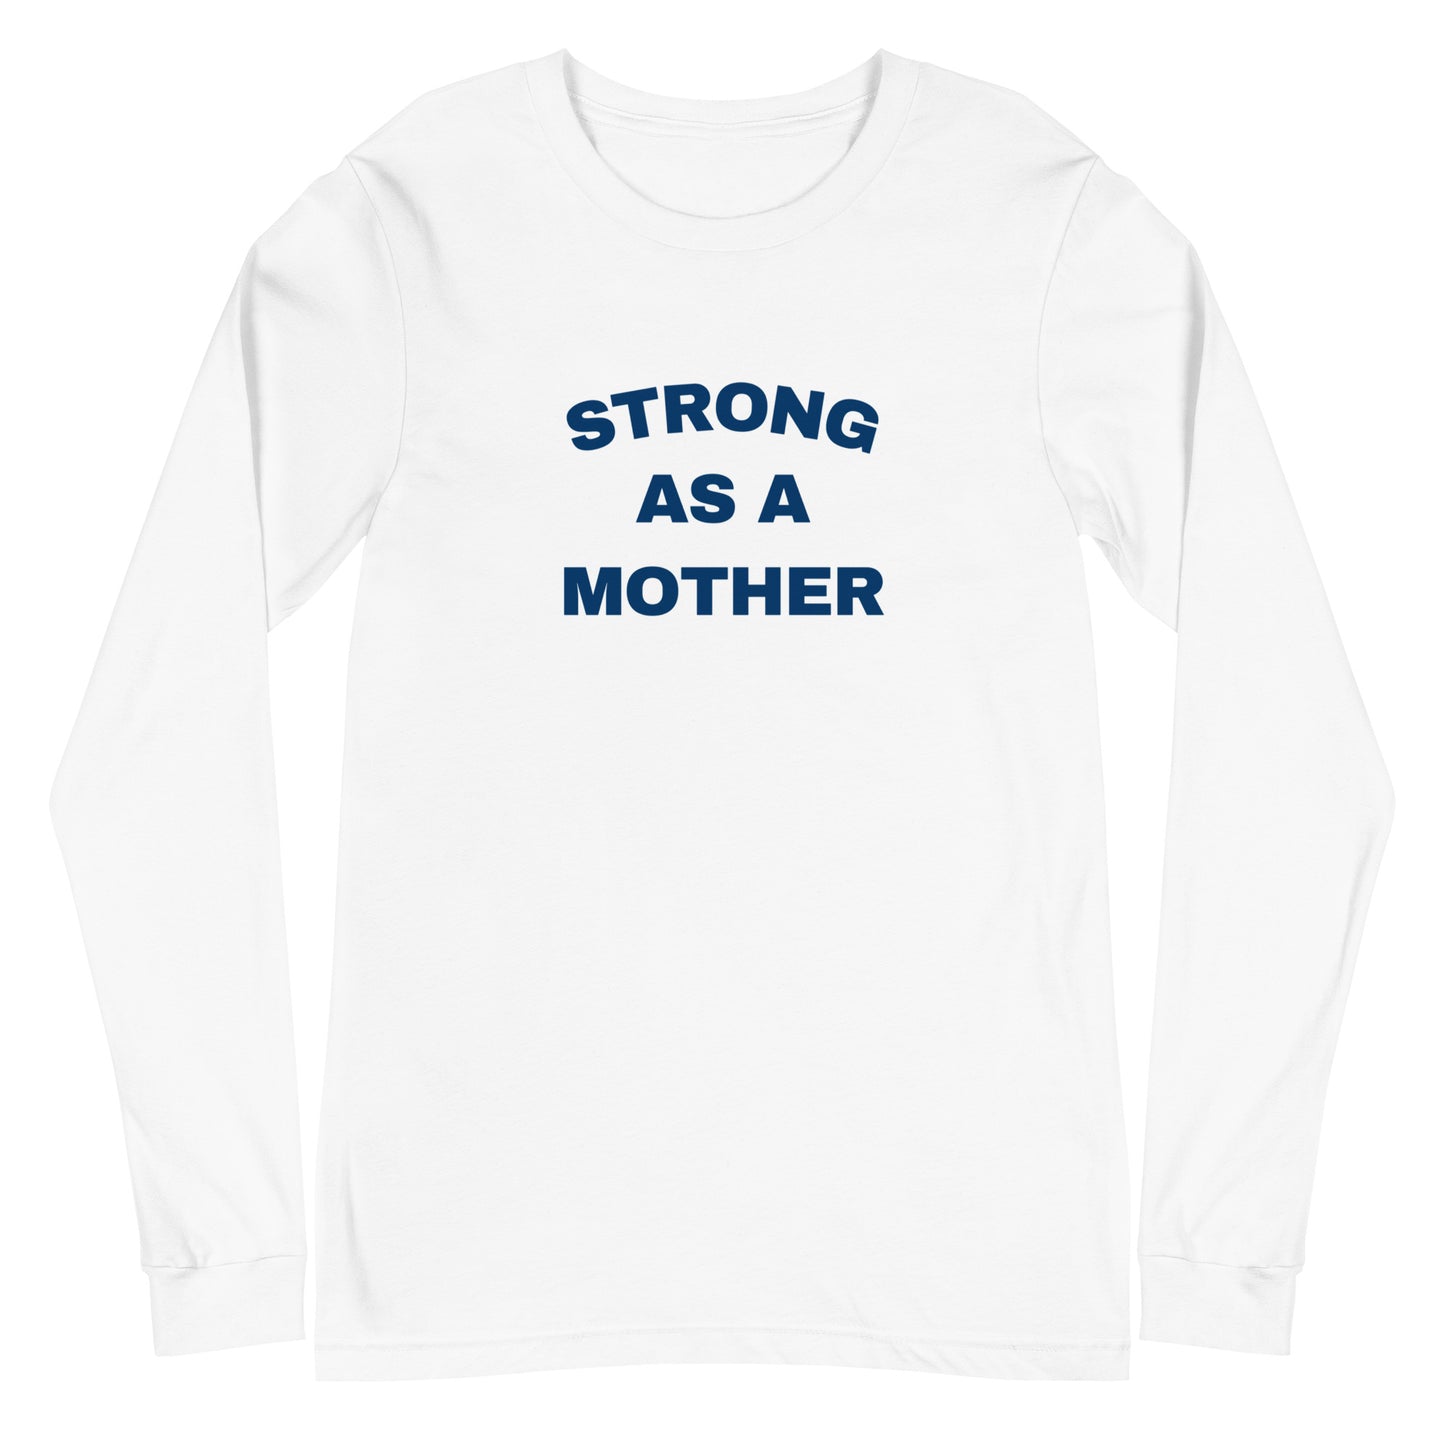 Strong as a Mother Long Sleeve Shirt | Art in Aging